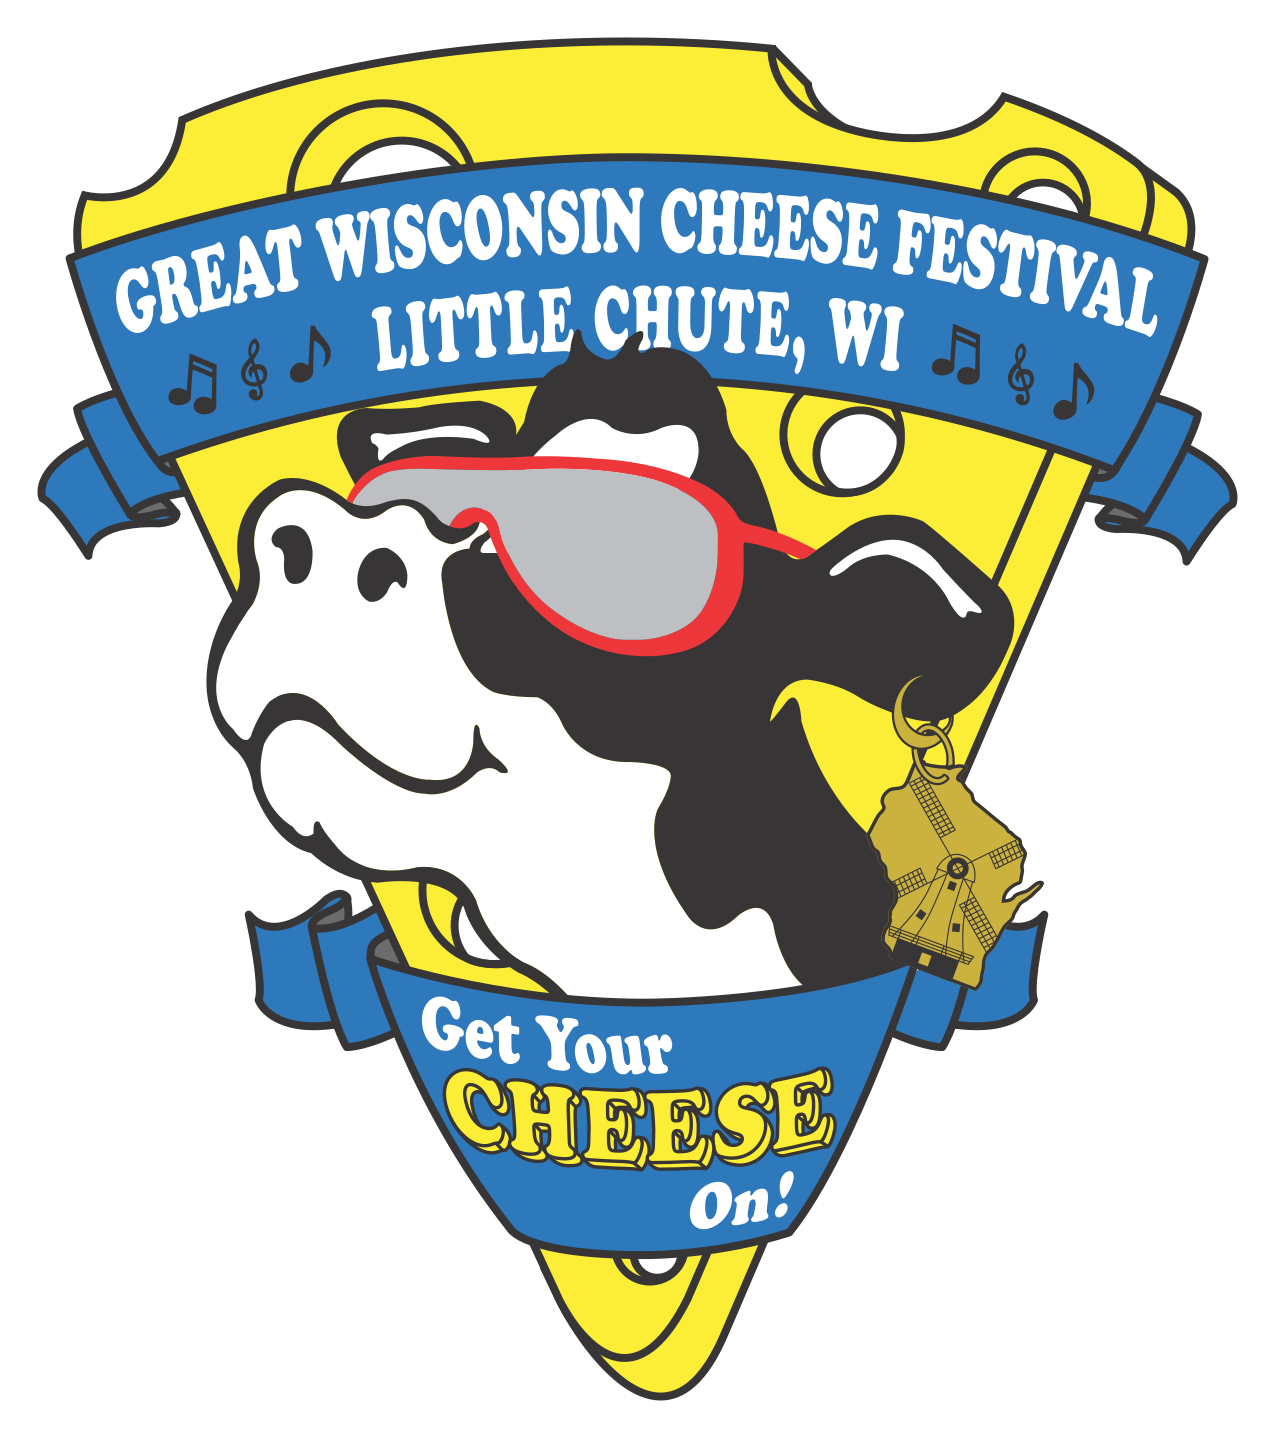 CheeseFest Great Wisconsin Cheese Festival Little Chute Wisconsin